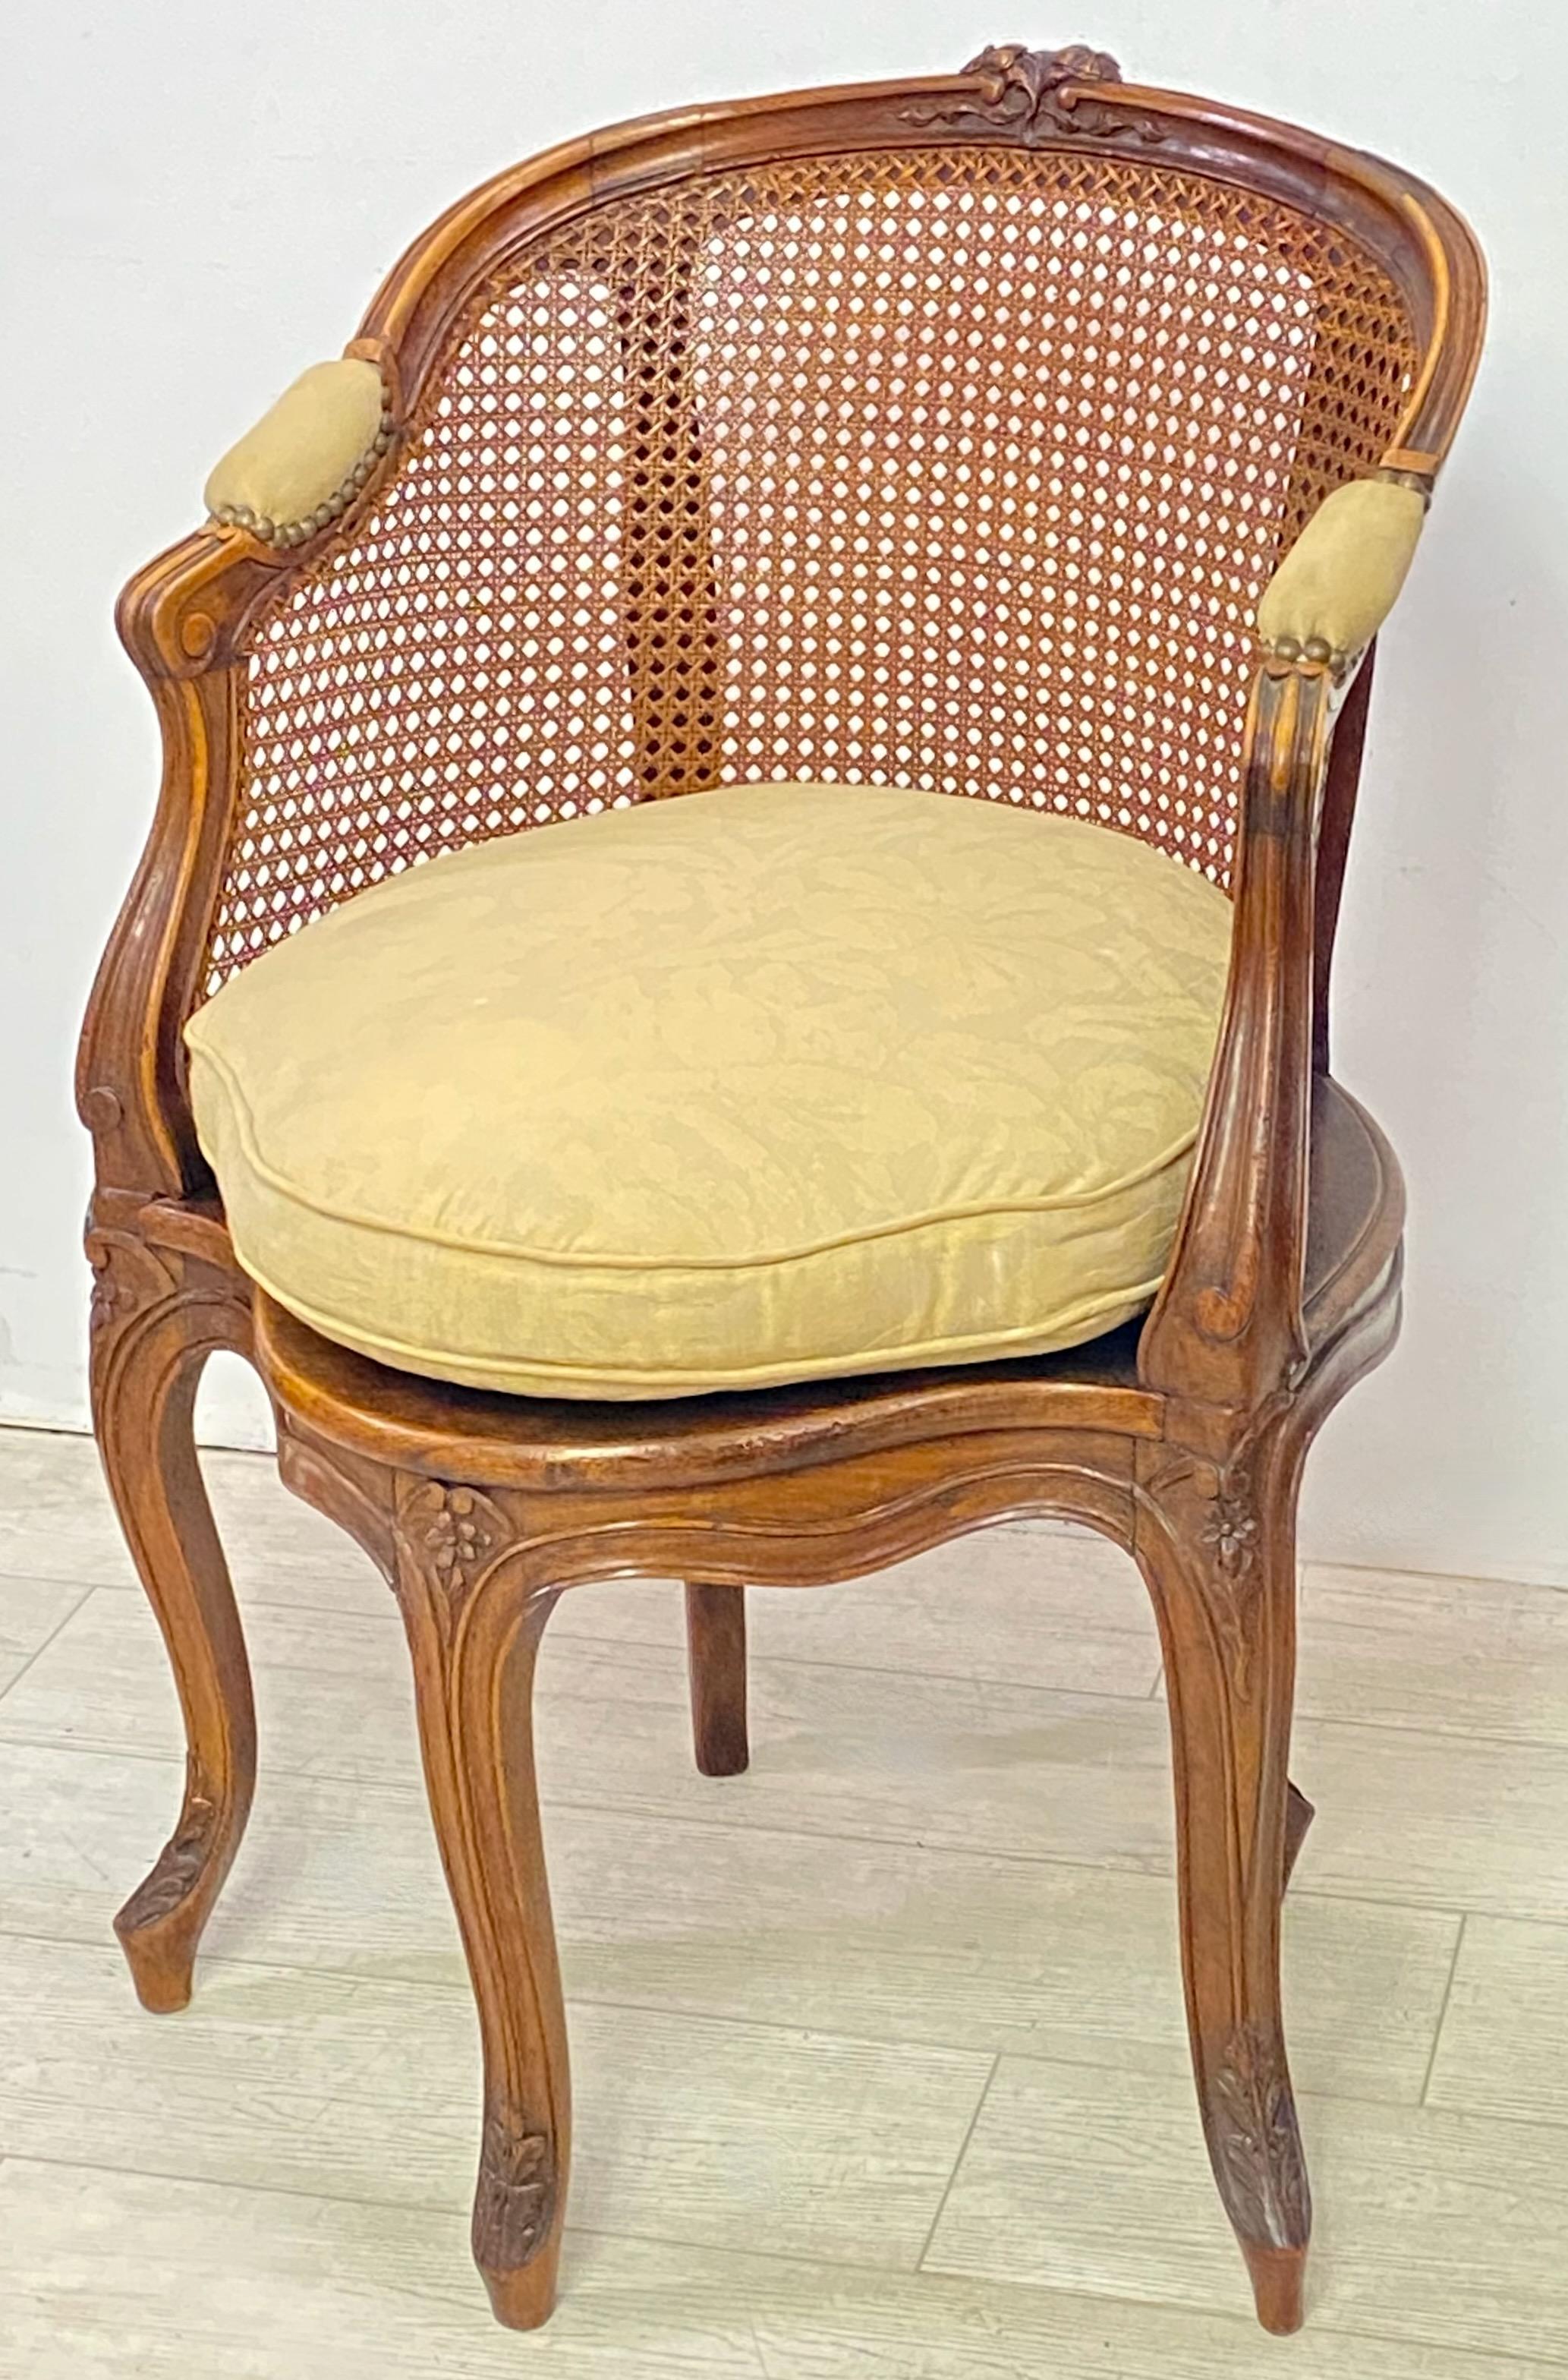 Traditional Louis XV style fauteuil de bureau desk chair for a study. Carved walnut frame with carved floral decoration standing on five elegant cabriolet legs. 
This timeless armchair is in very good condition commensurate with age and use, and